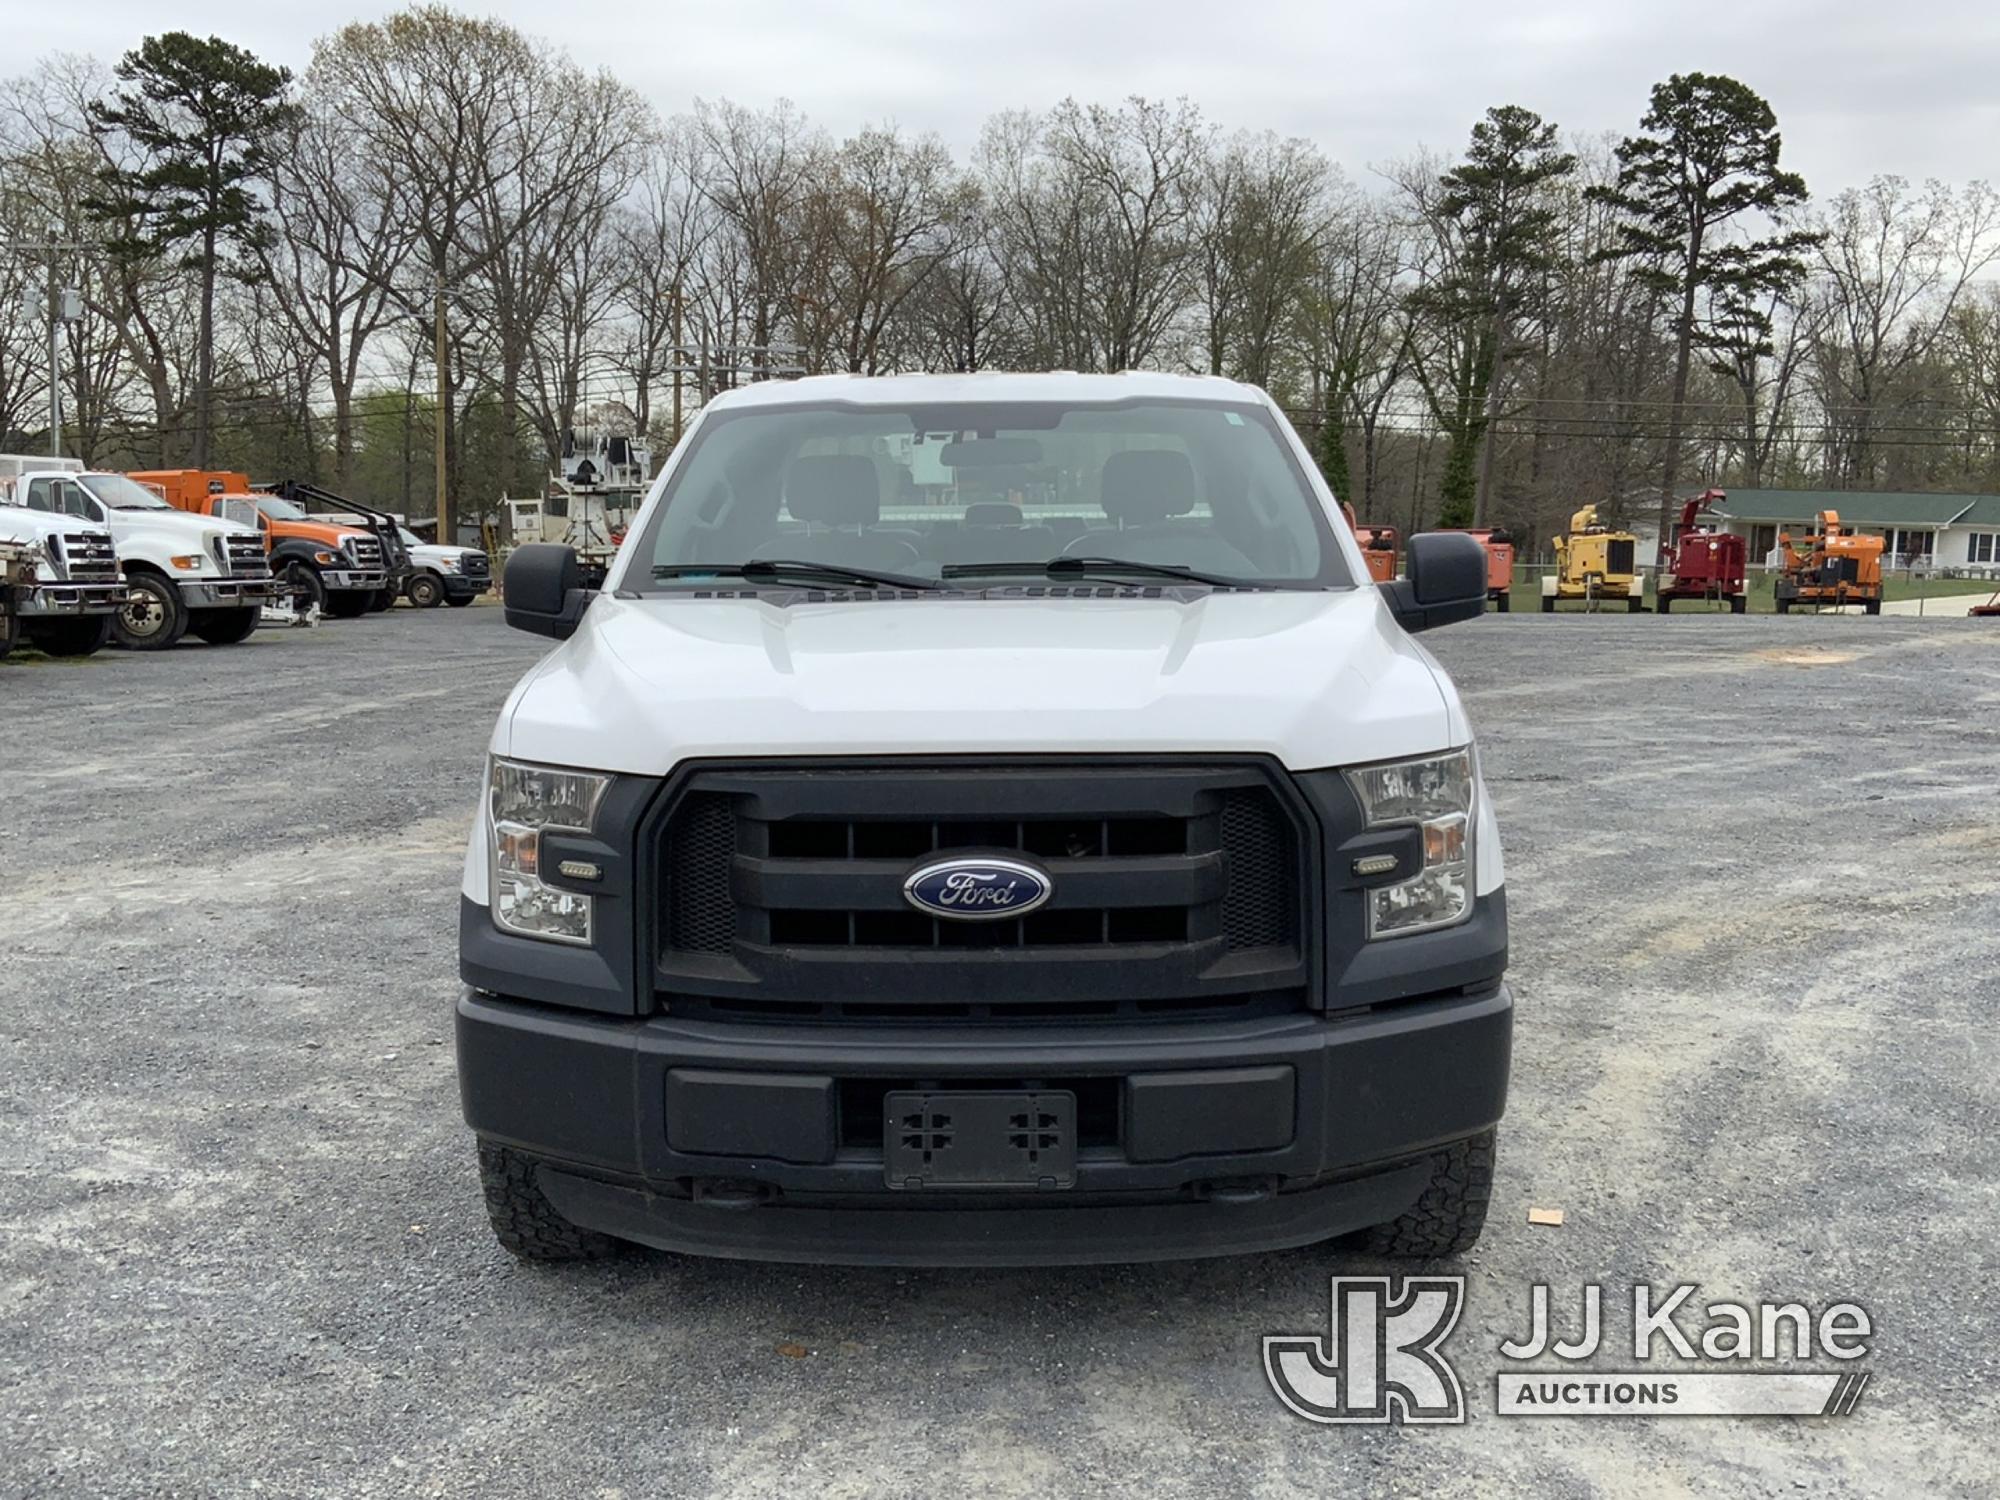 (Shelby, NC) 2015 Ford F150 4x4 Extended-Cab Pickup Truck Runs & Moves) (Runs Rough